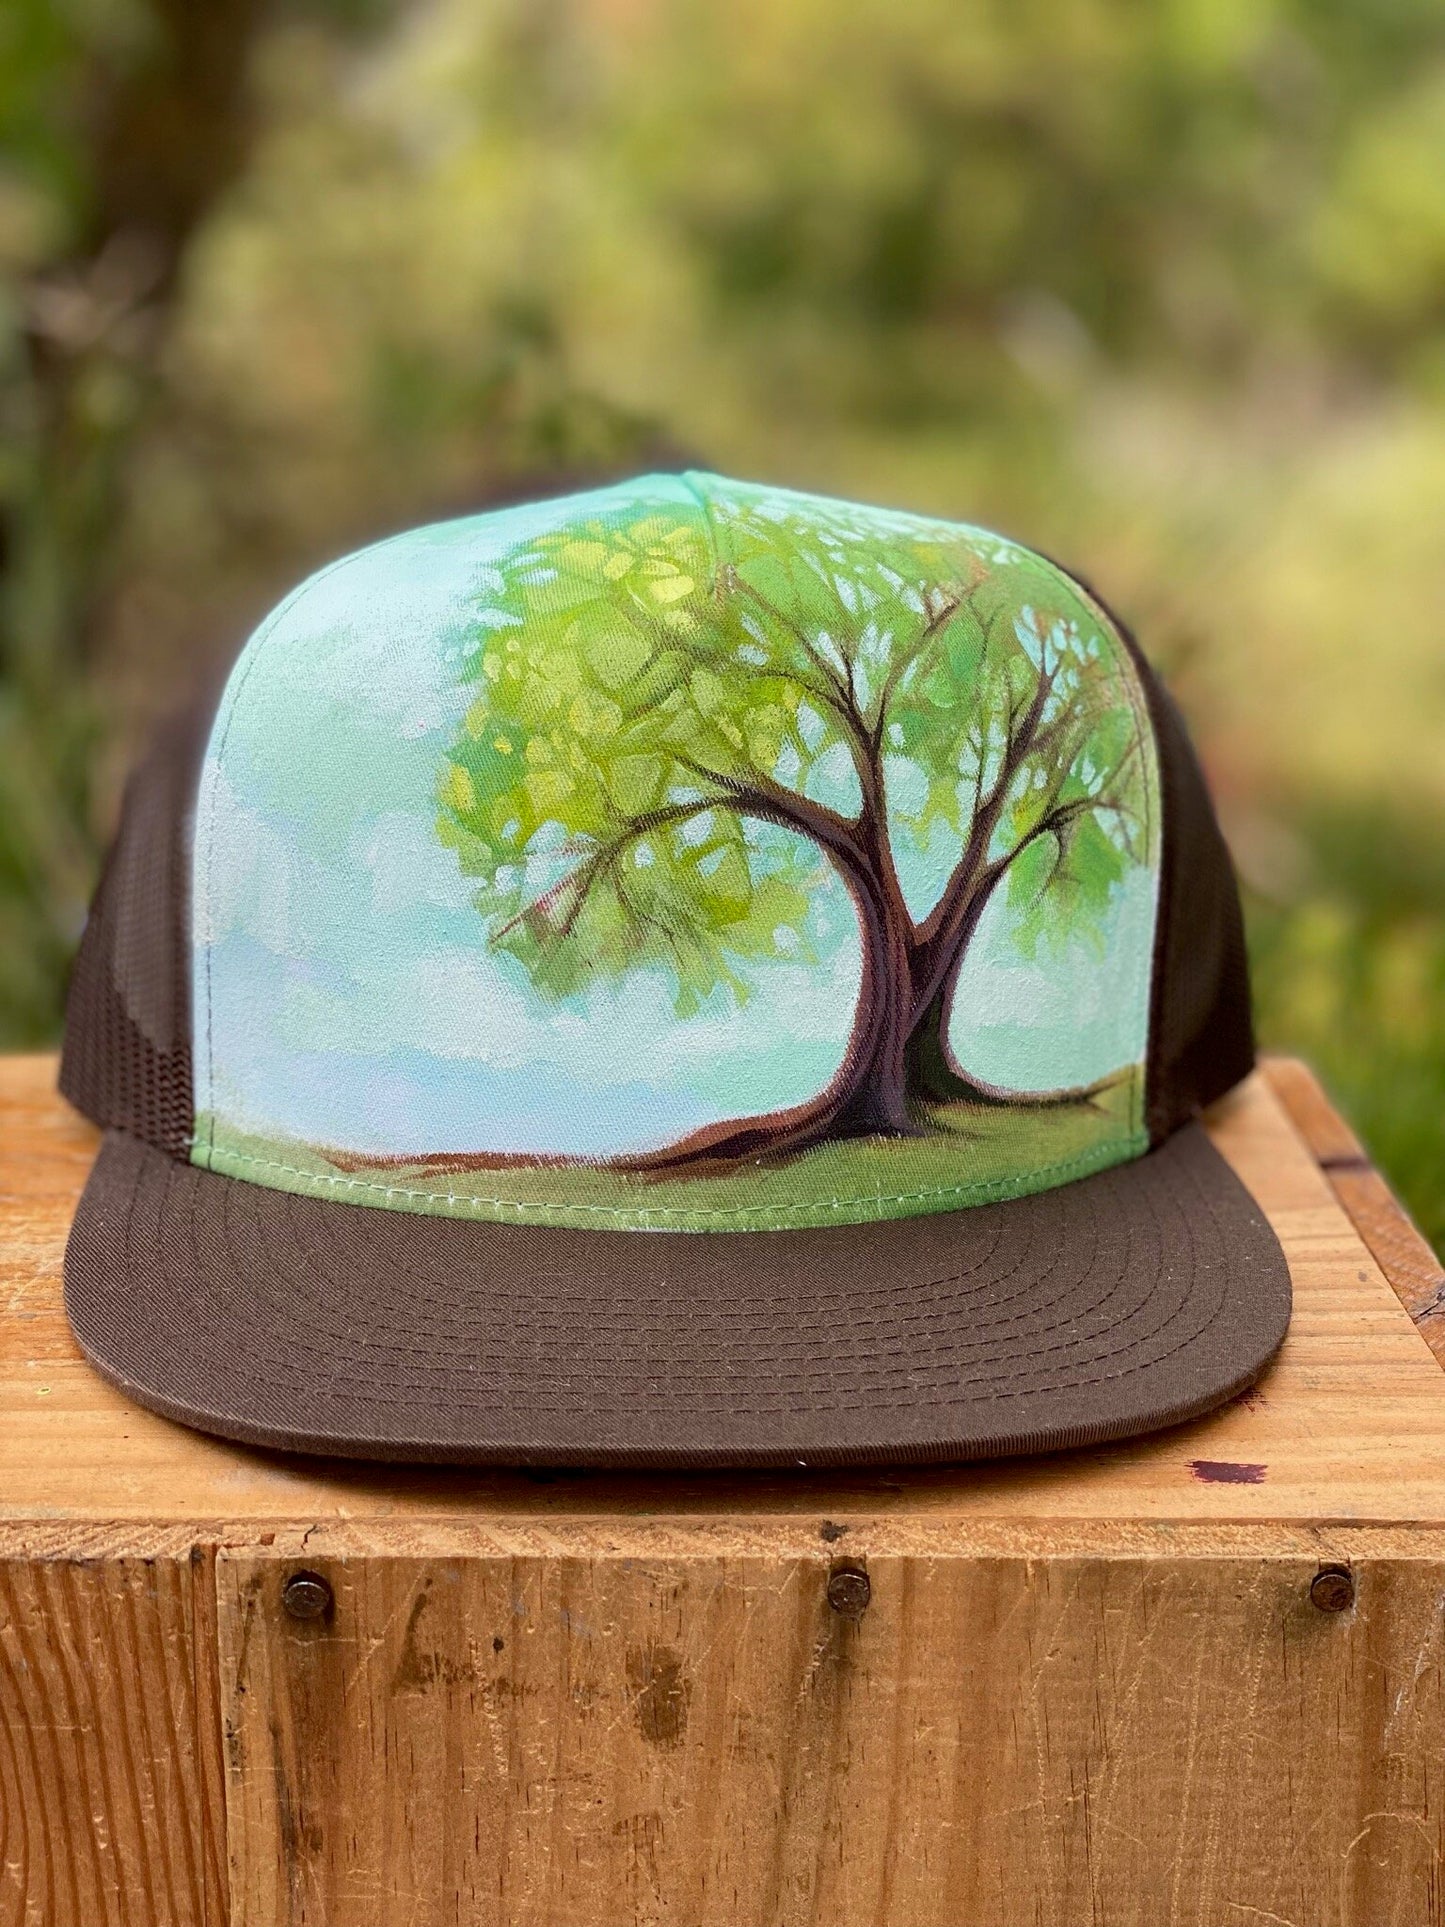 "The Tree" Hand Painted Hat